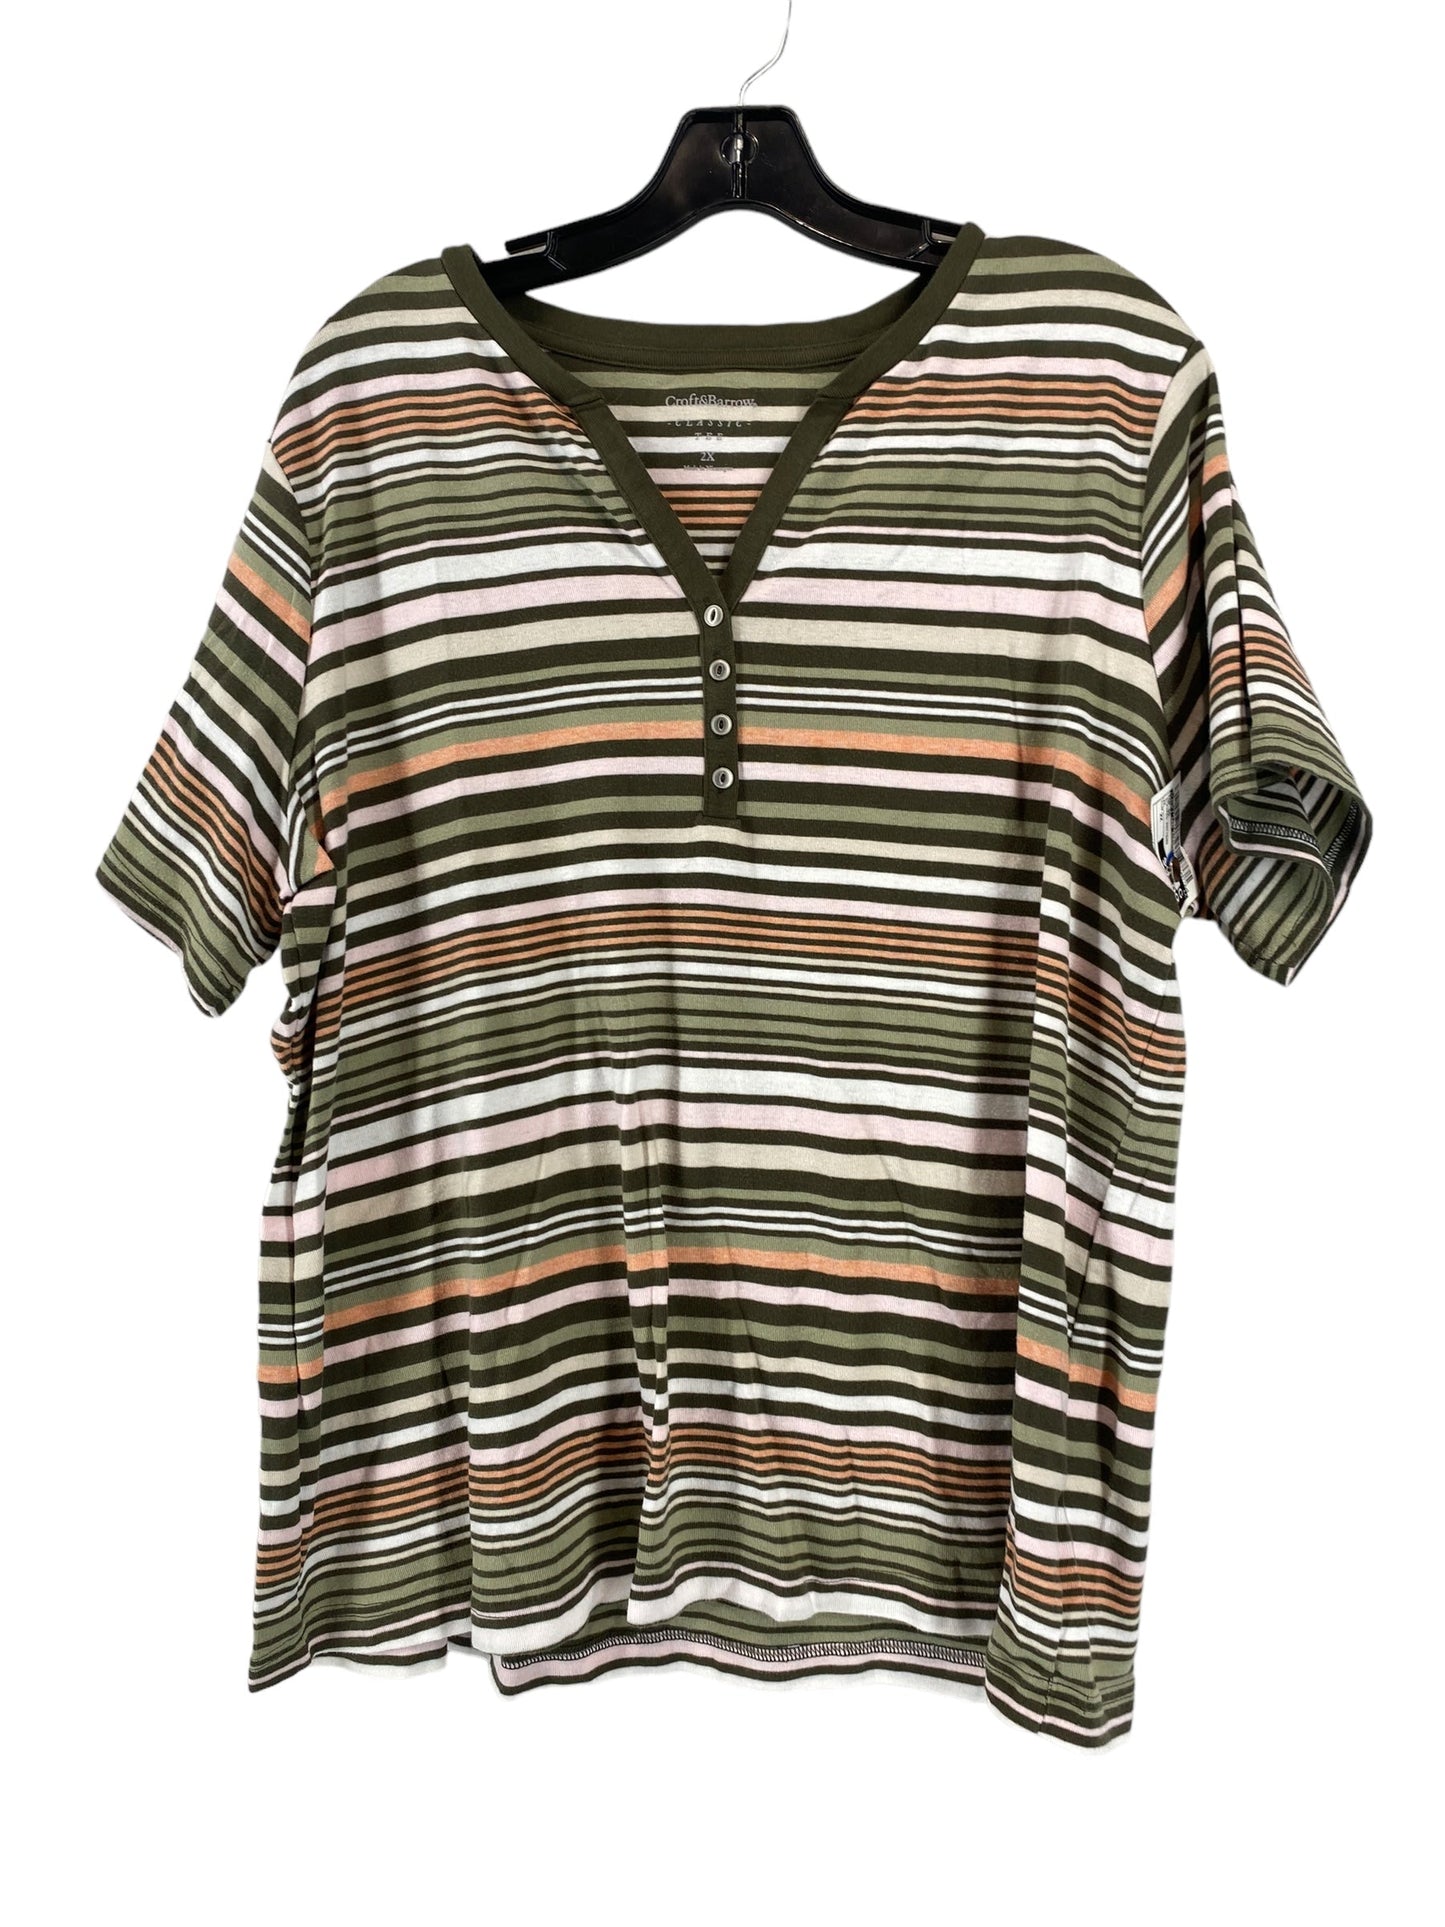 Striped Pattern Top Short Sleeve Croft And Barrow, Size 2x